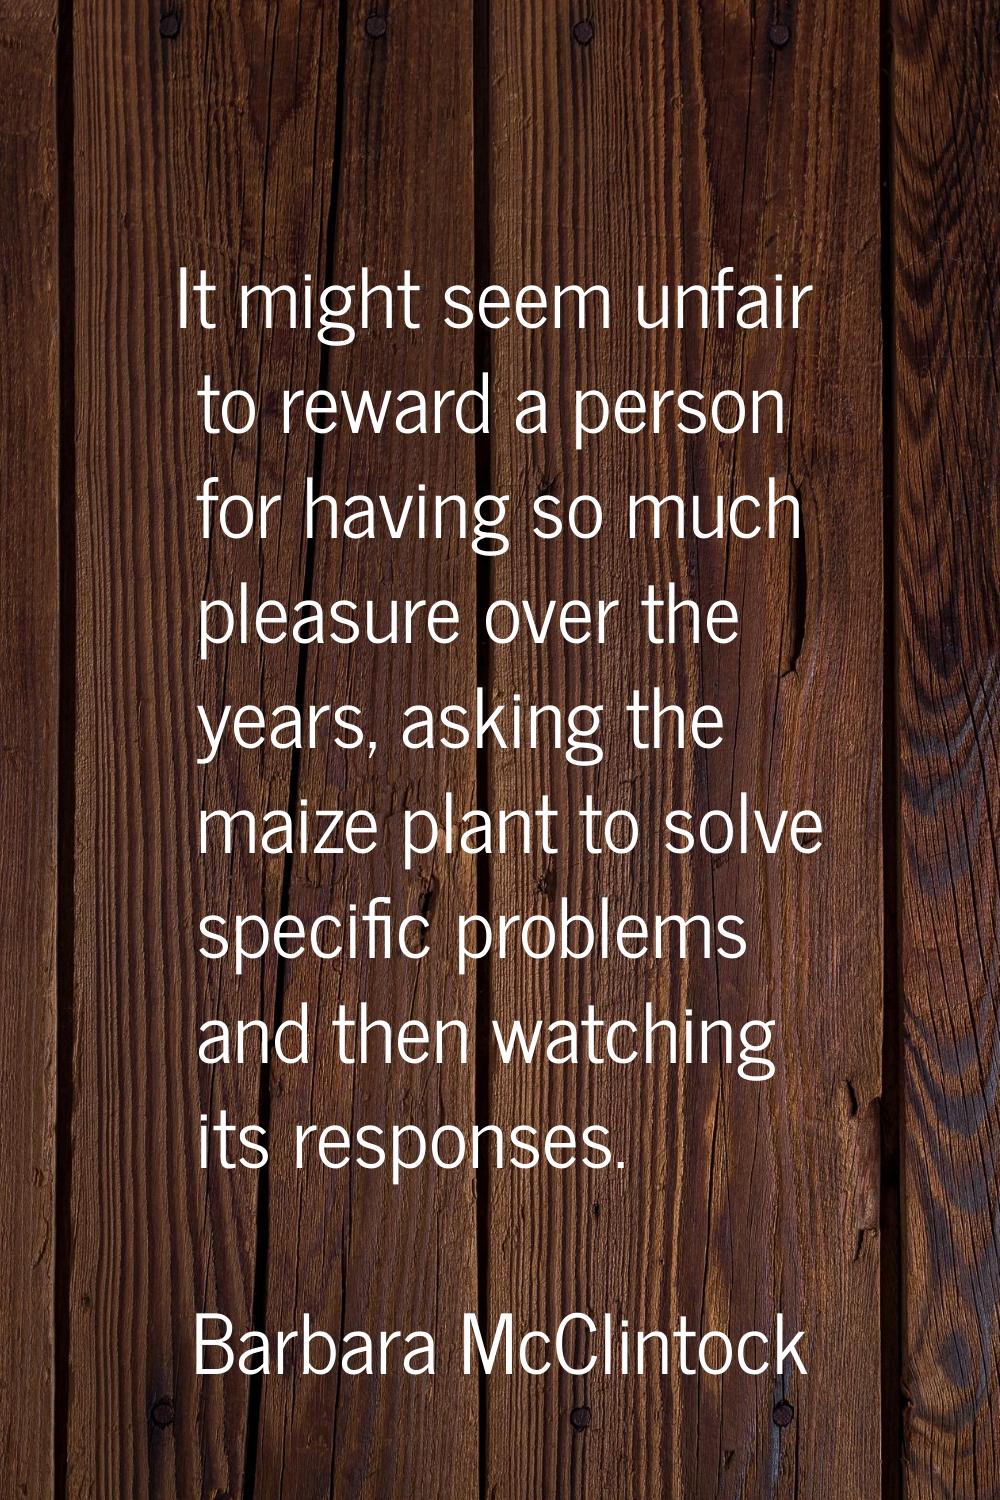 It might seem unfair to reward a person for having so much pleasure over the years, asking the maiz